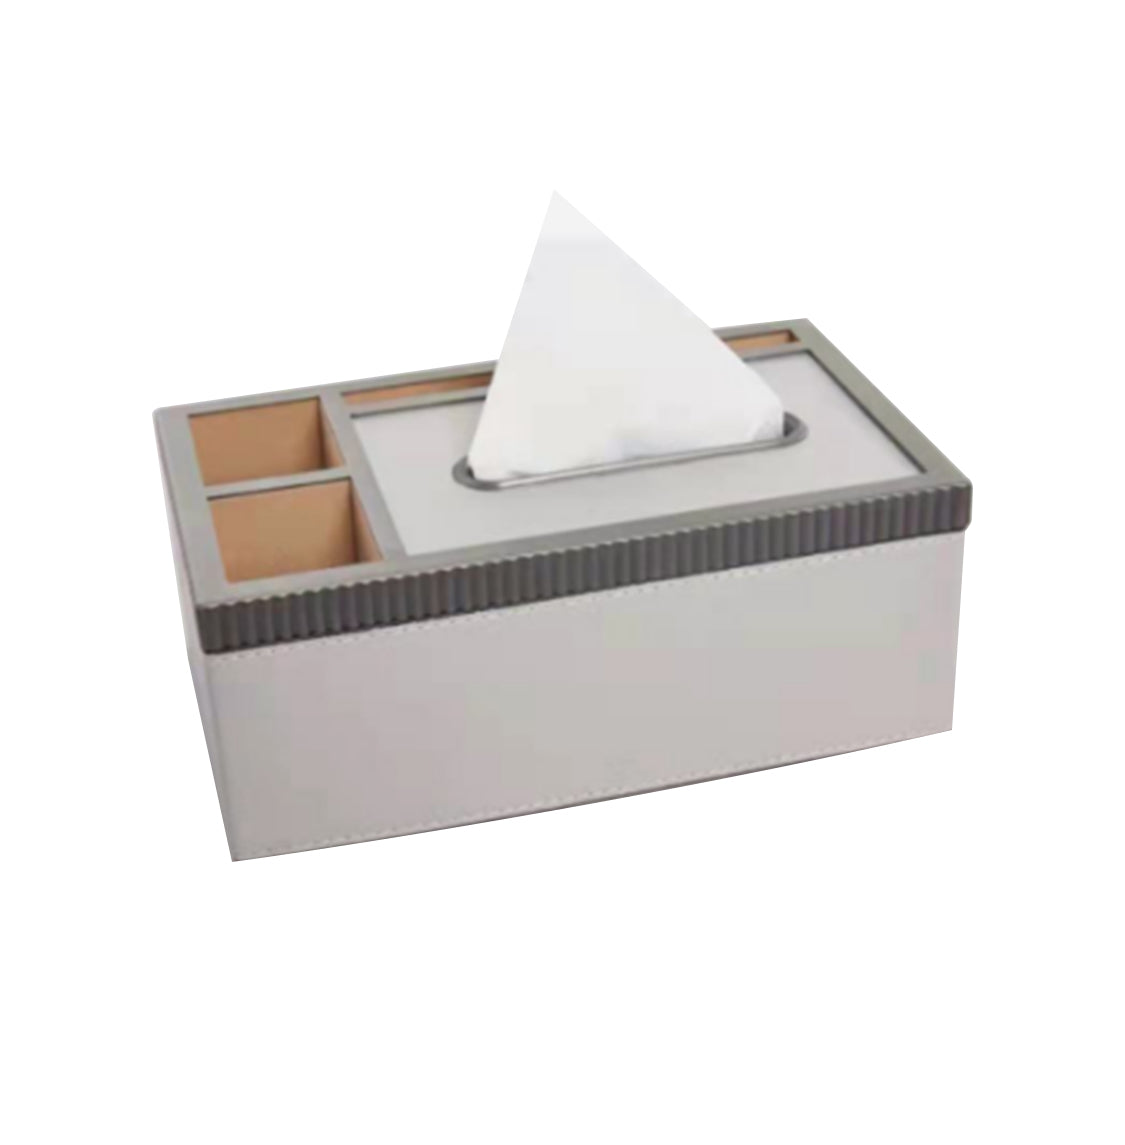 Light gray leather tissue box with storage